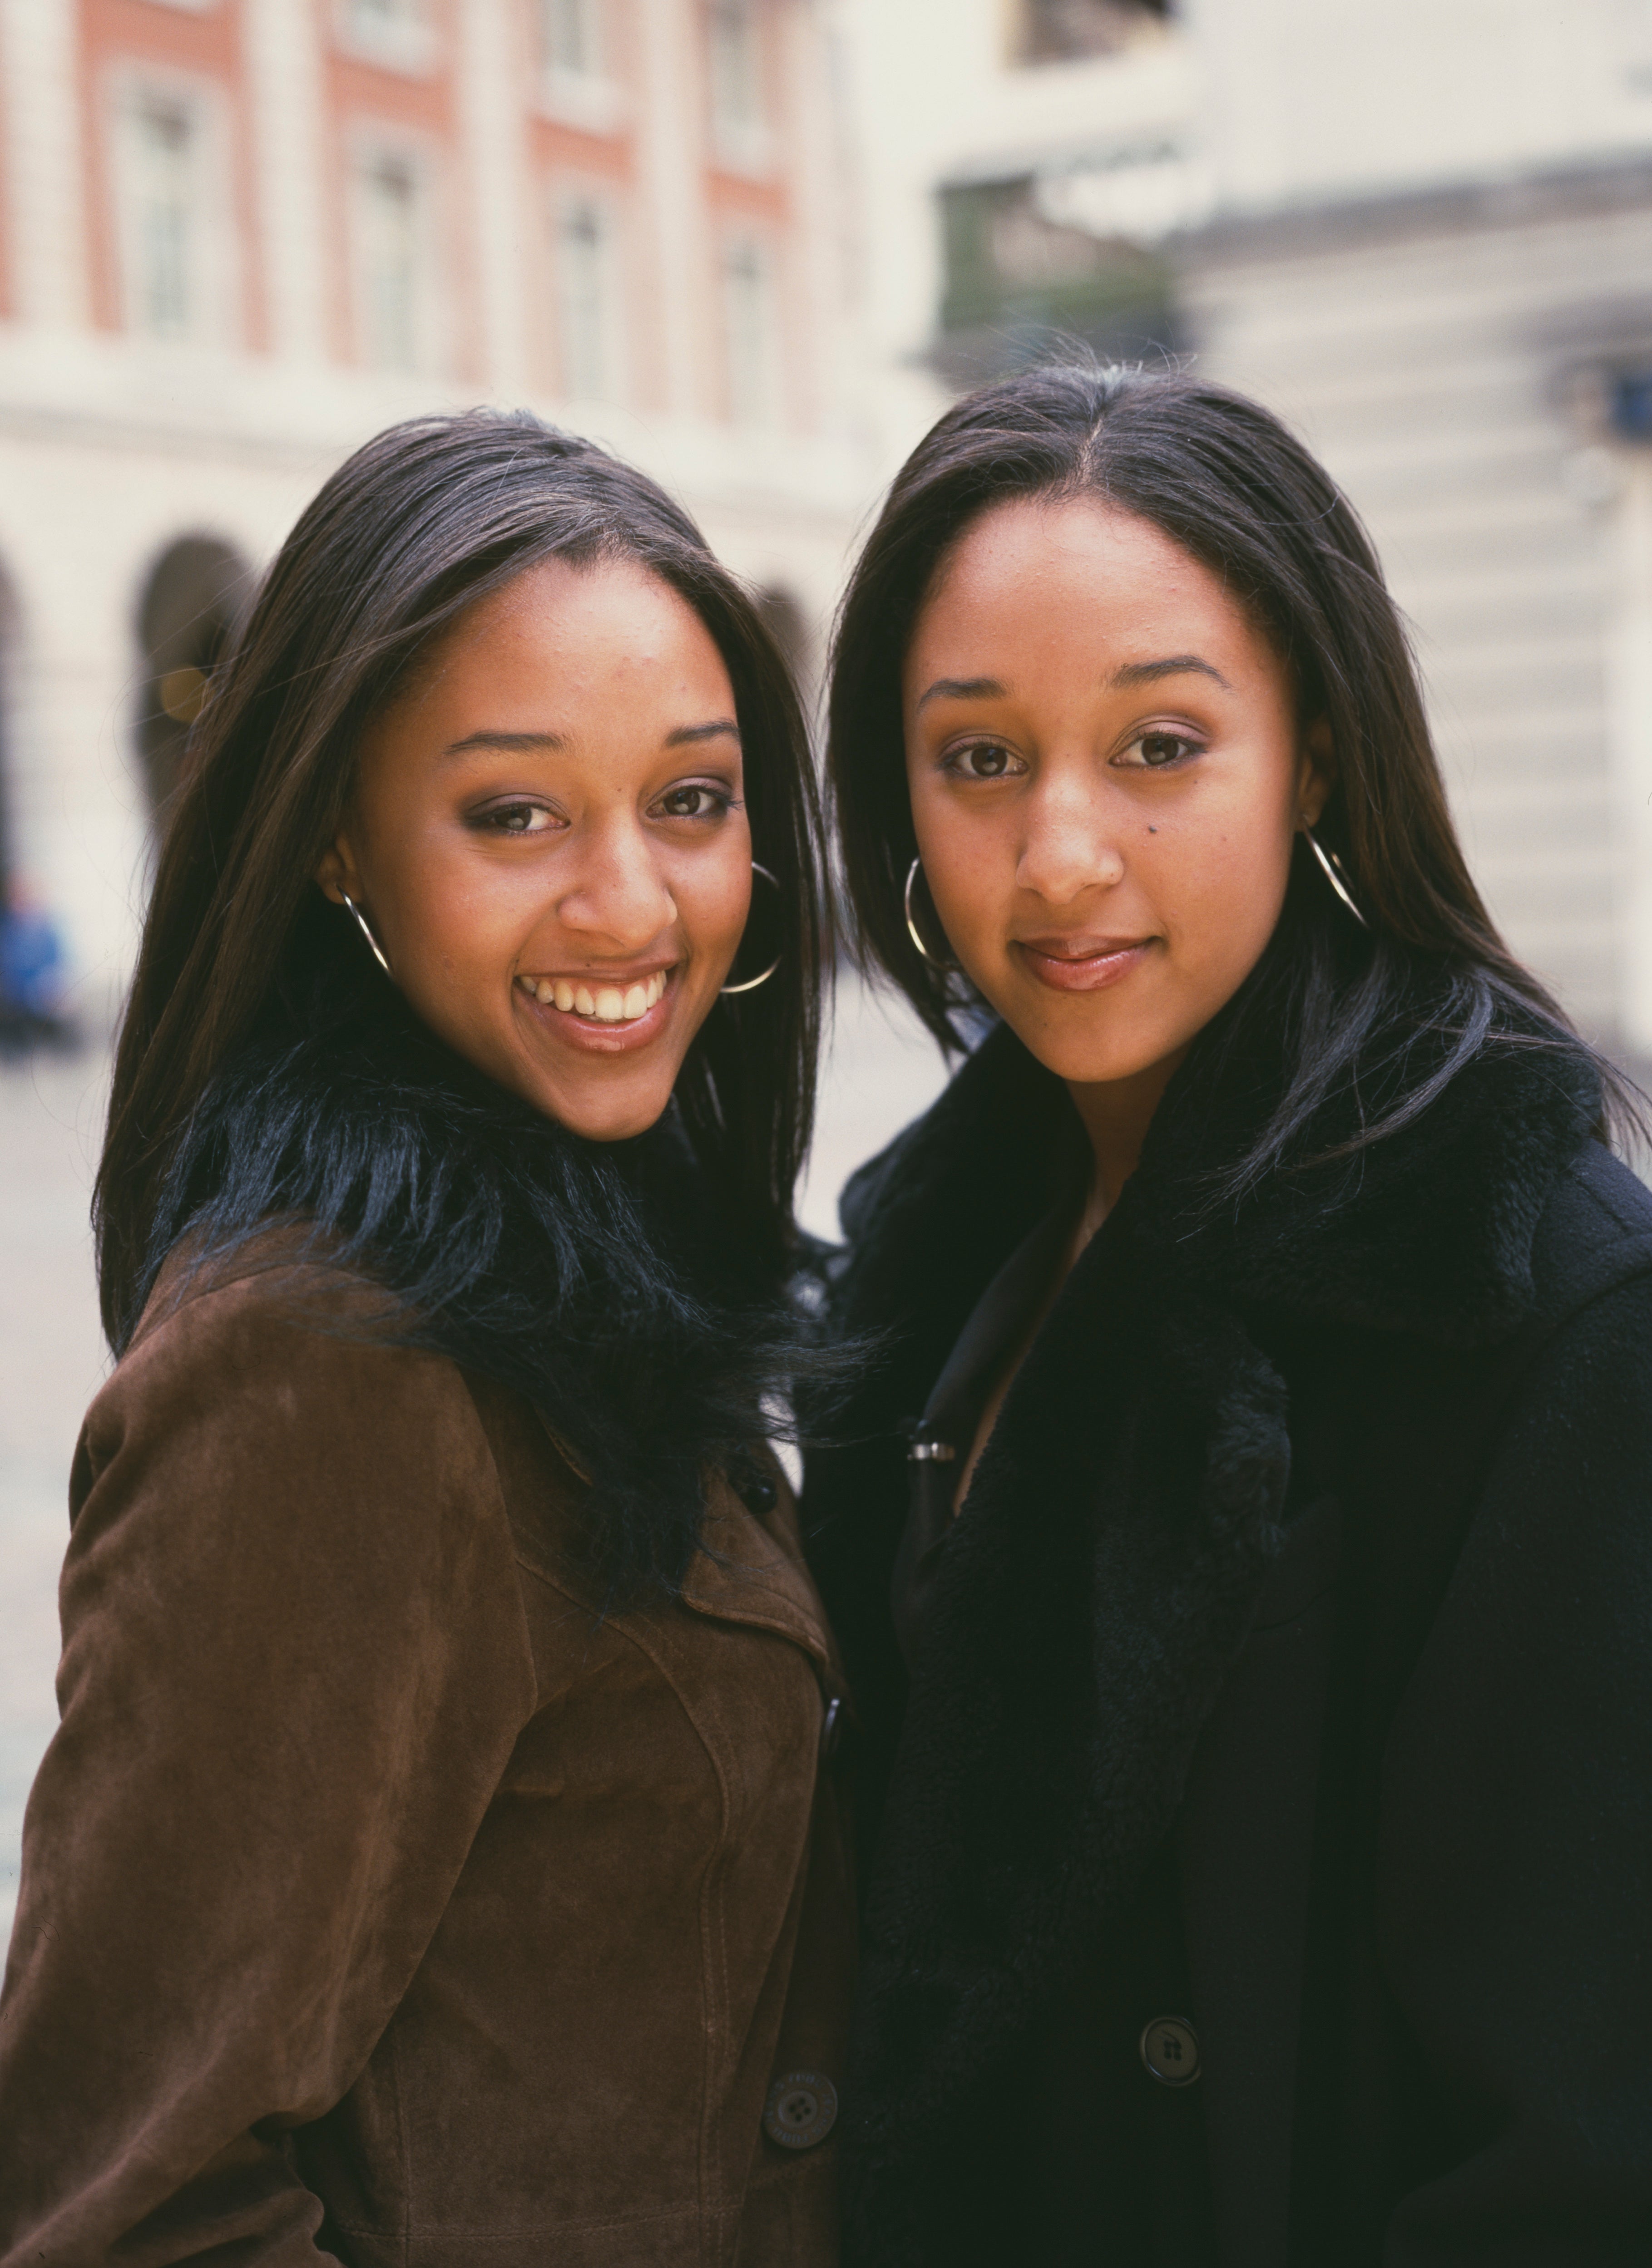 15 Photos Of Tia And Tamera That Prove They Were The Queens Of 90’s Style